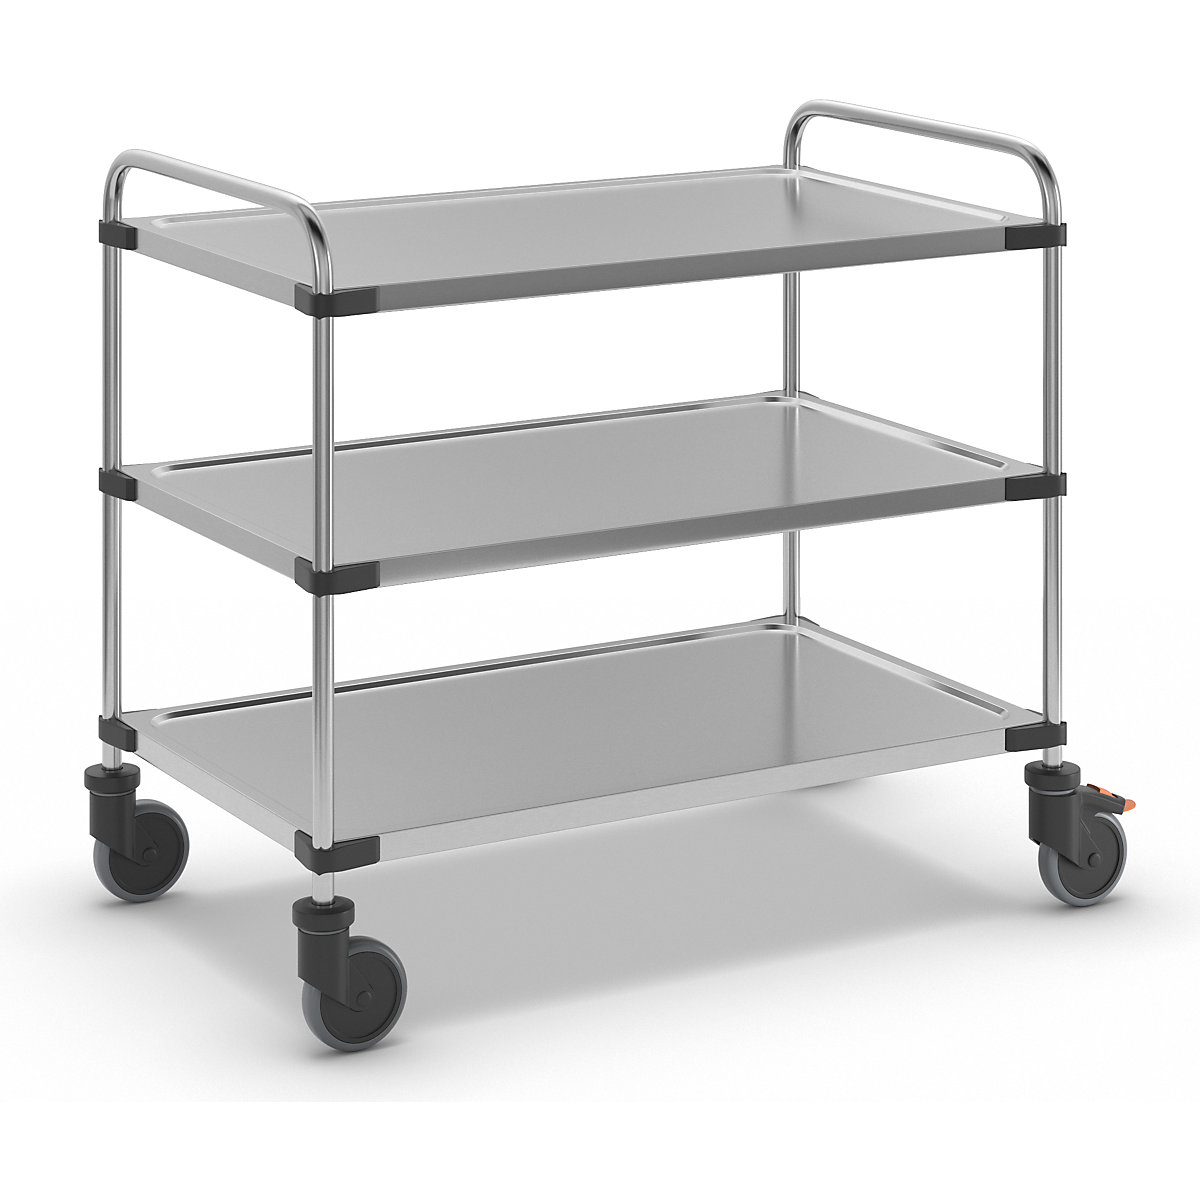 Stainless steel table trolley, with 3 shelves, LxWxH 1070 x 670 x 950 mm, assembled-8